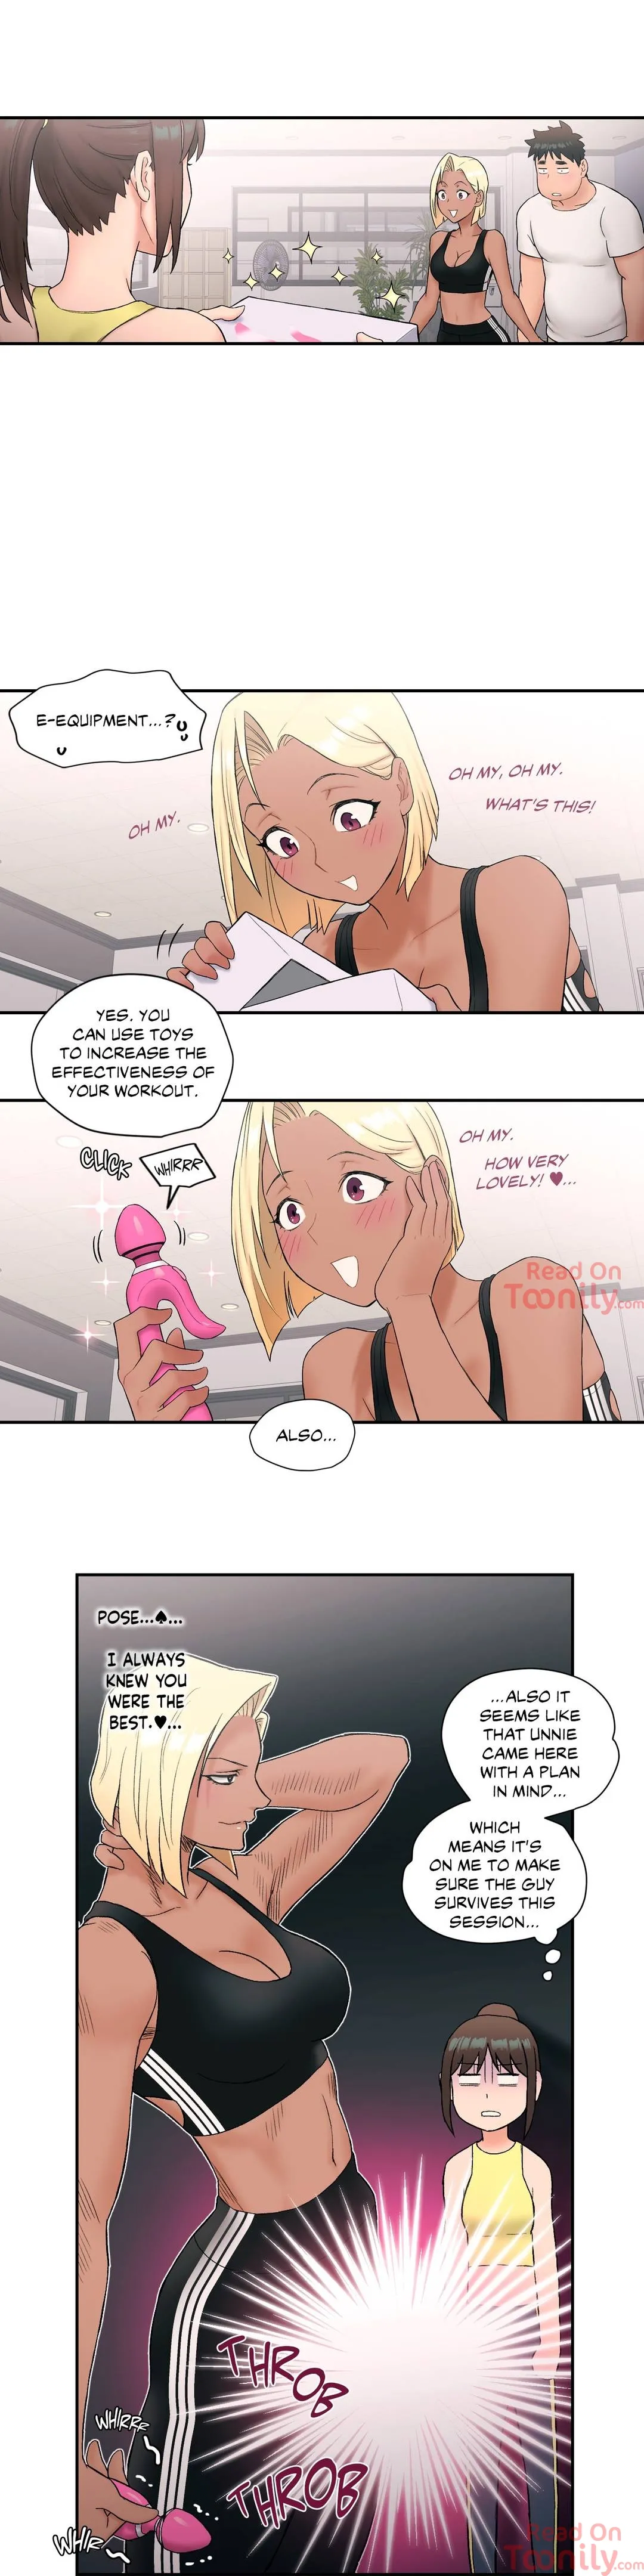 Sexercise - Chapter 11 Page 16